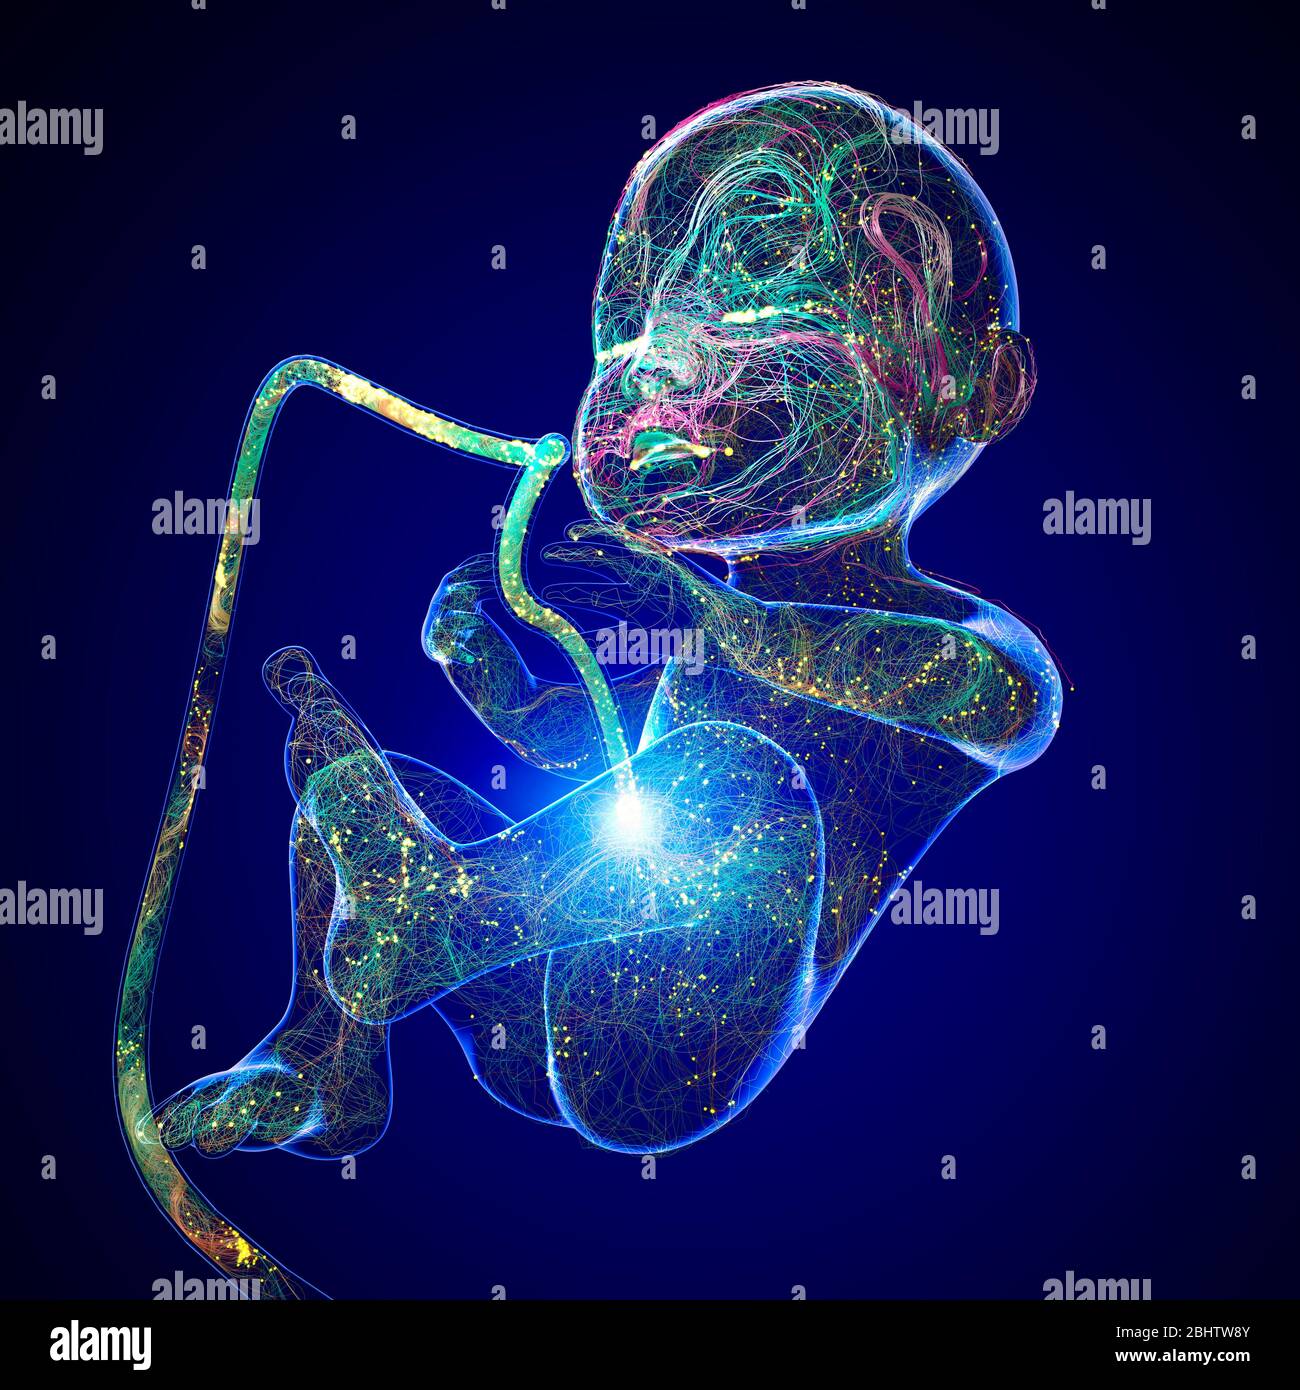 Growth of the fetus, umbilical cord, nourishment and energy for the evolution of the baby. Connection between fetus and placenta. 3d render Stock Photo